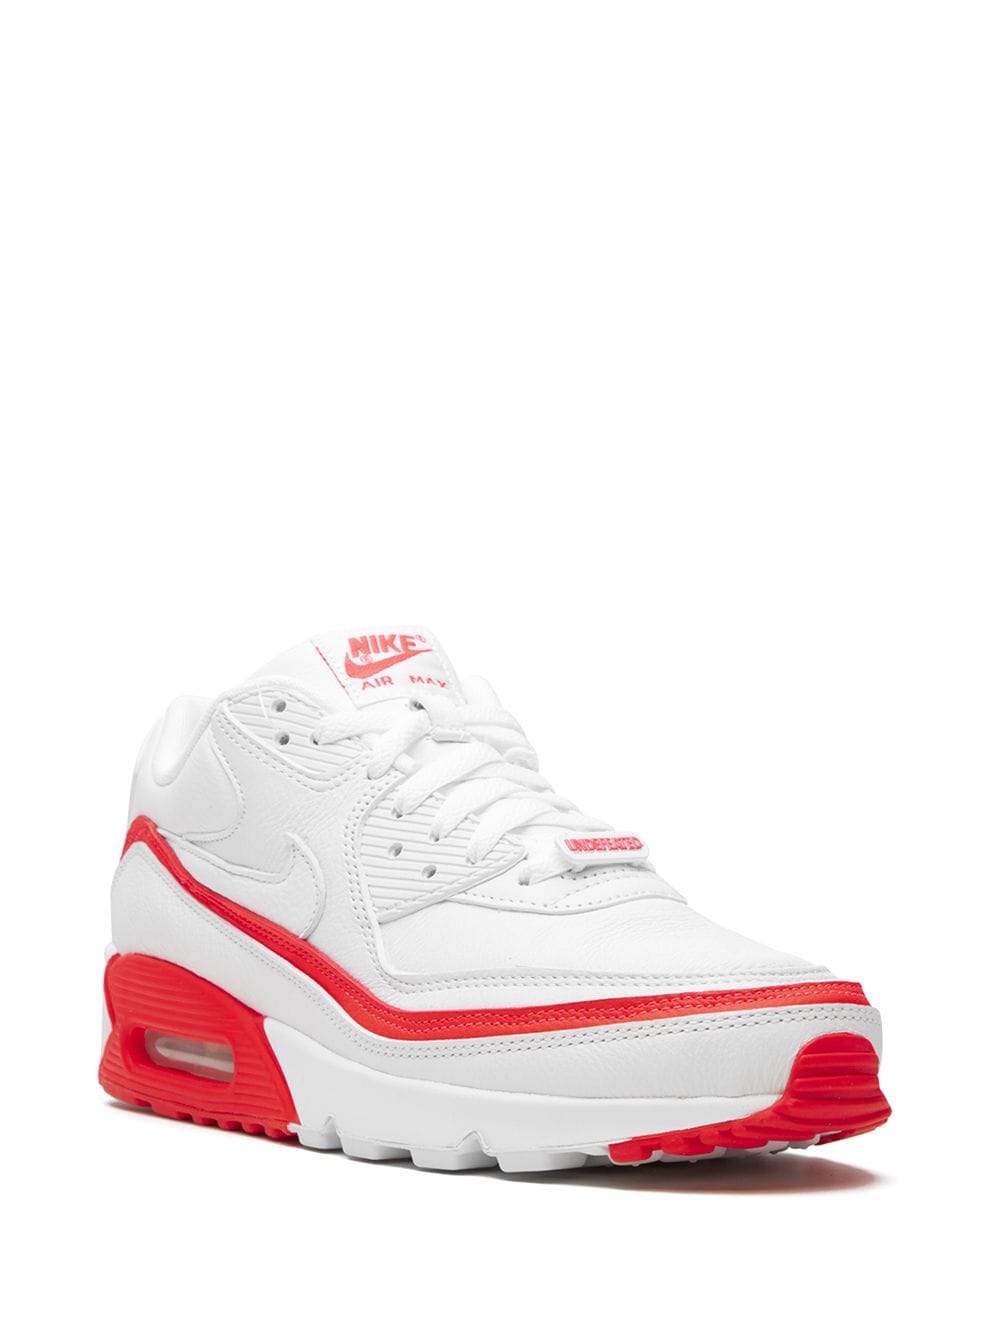 Shop Nike X Undefeated Air Max 90 "white/red" Sneakers